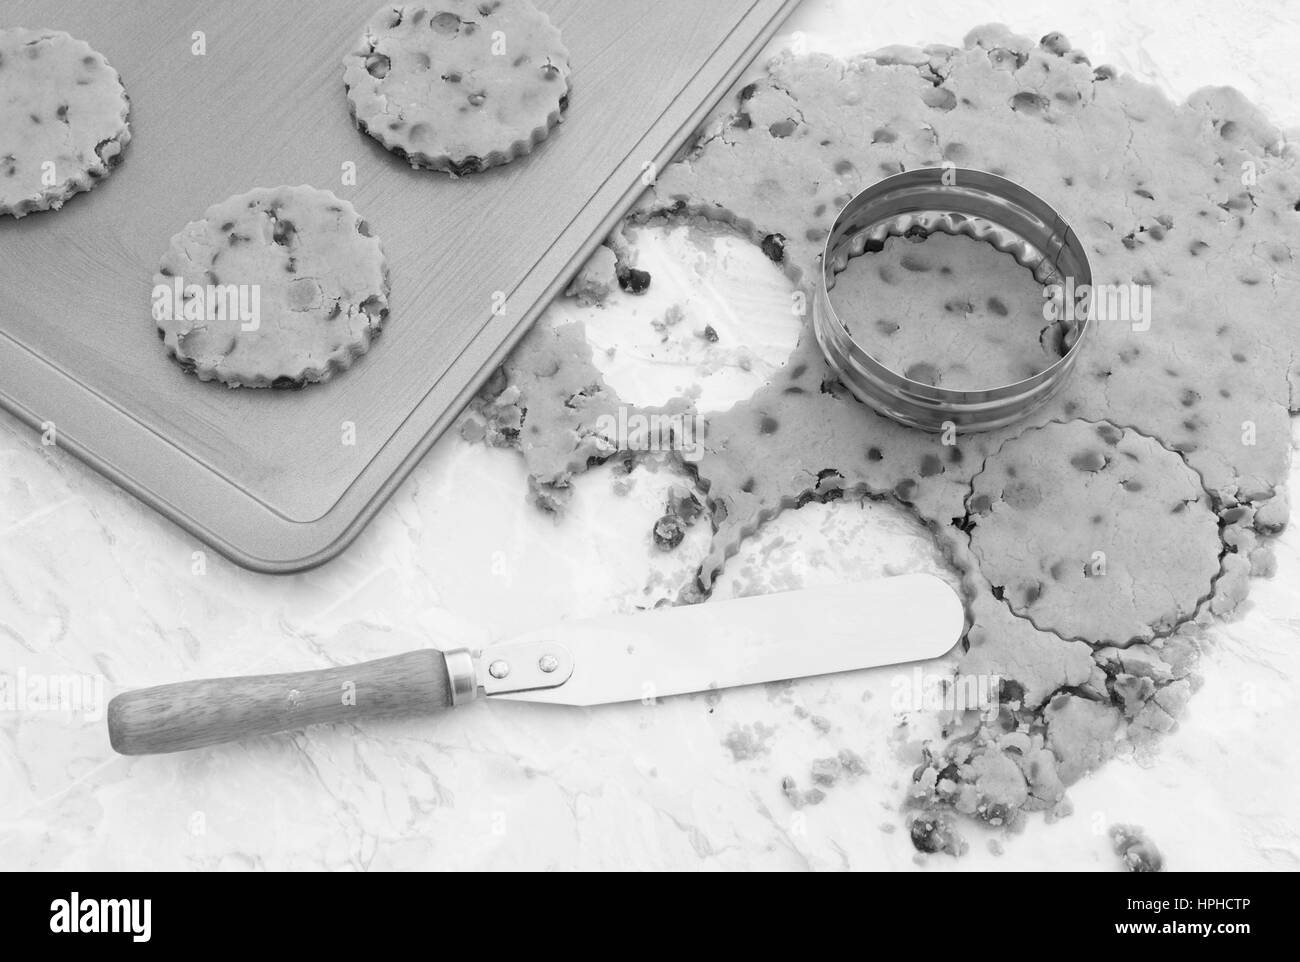 Baking chocolate chip cookies - cutting circles from dough with a cookie cutter. A palette knife is used to transfer the shapes to the baking tray. Stock Photo